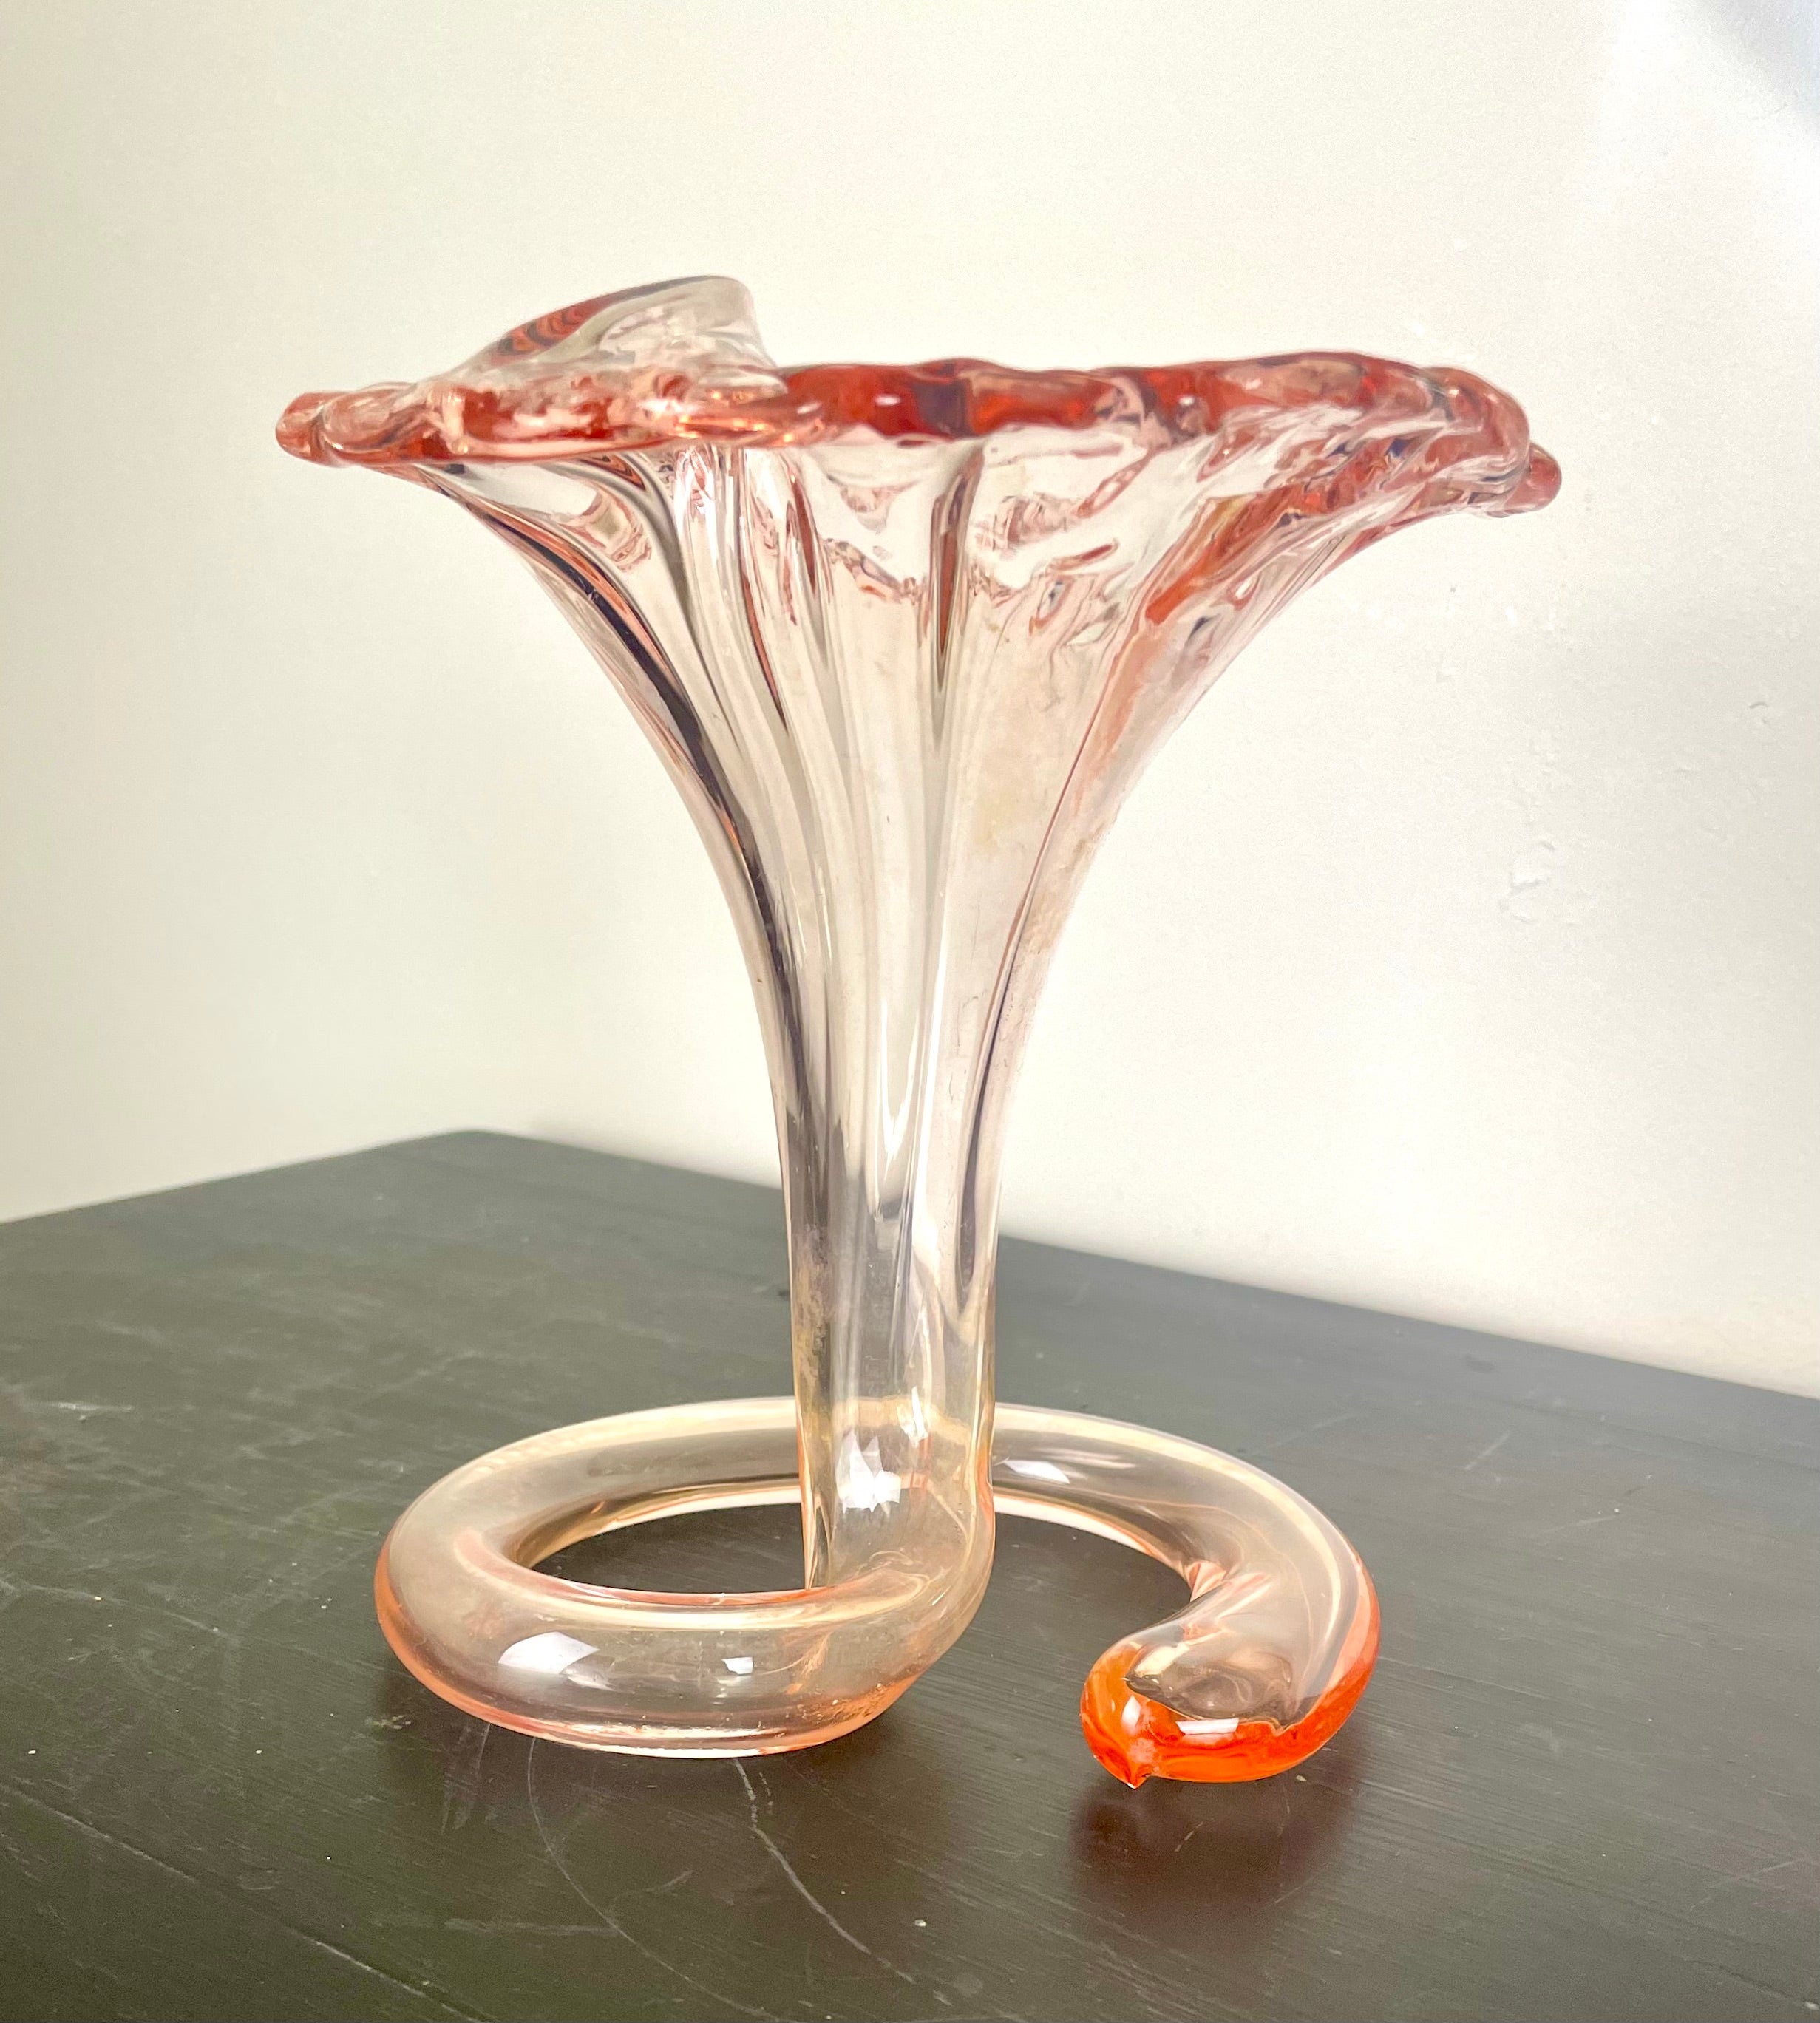 Elegant trumpet vase for flowers in blown glass with spiral base.
Blown glass forms a stylized trumpet fleur de lys resting on a spiral coil base.
Textured glass surface around the wide rim.
The spiral base is hollow and also retains water when